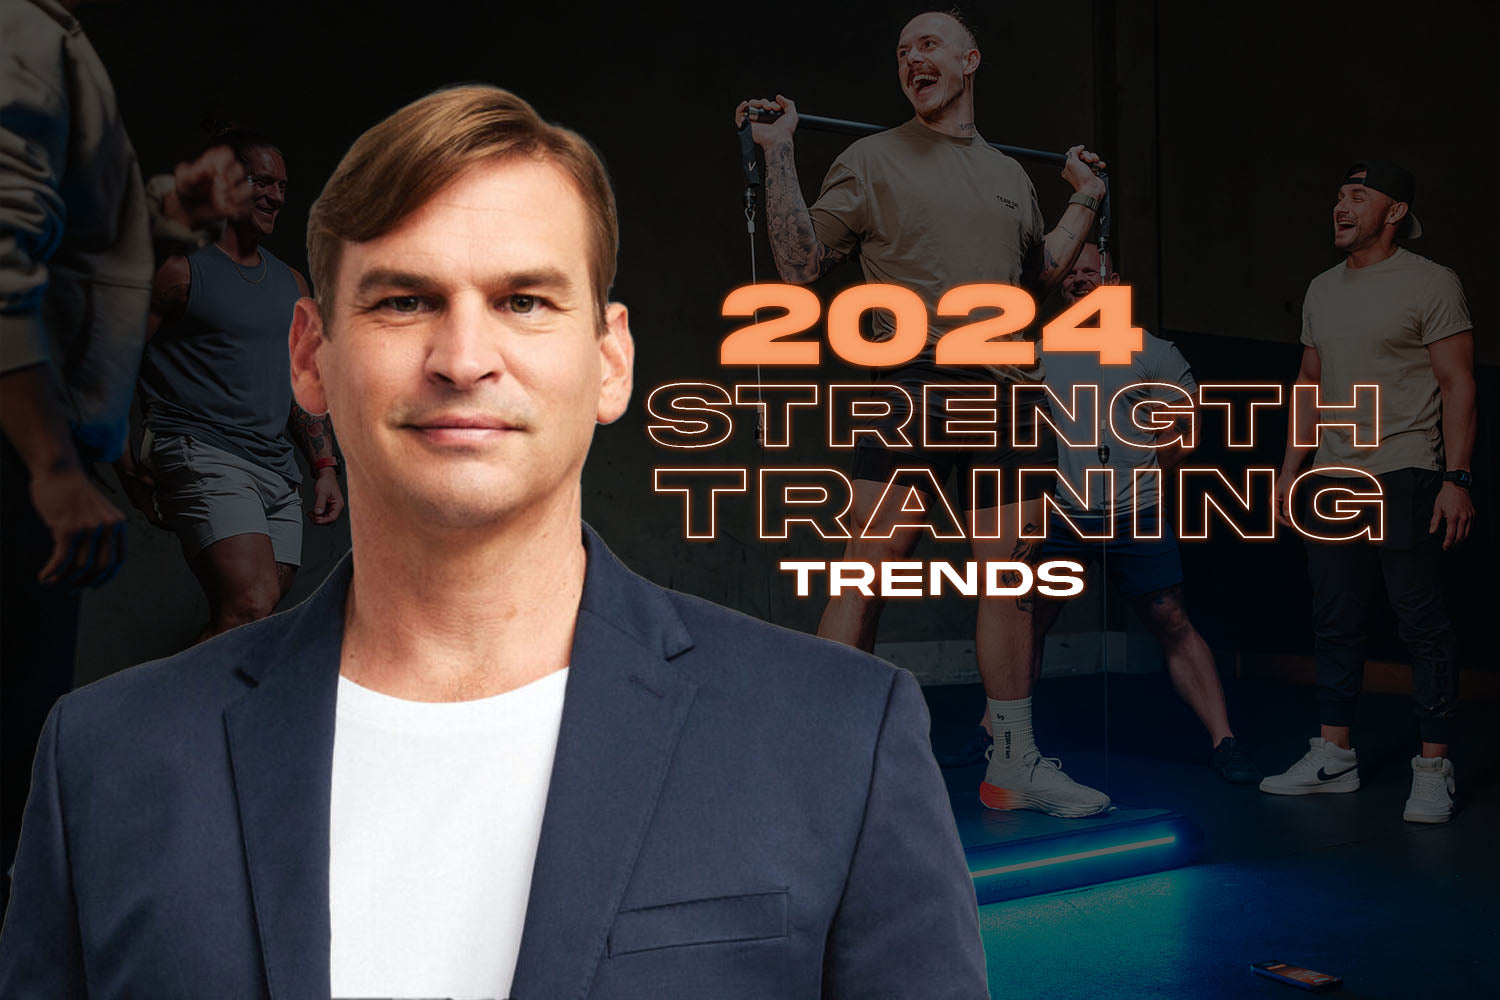 Strength Training Trends 2024 Jon Gregory, Founder and CEO of Vitruvi